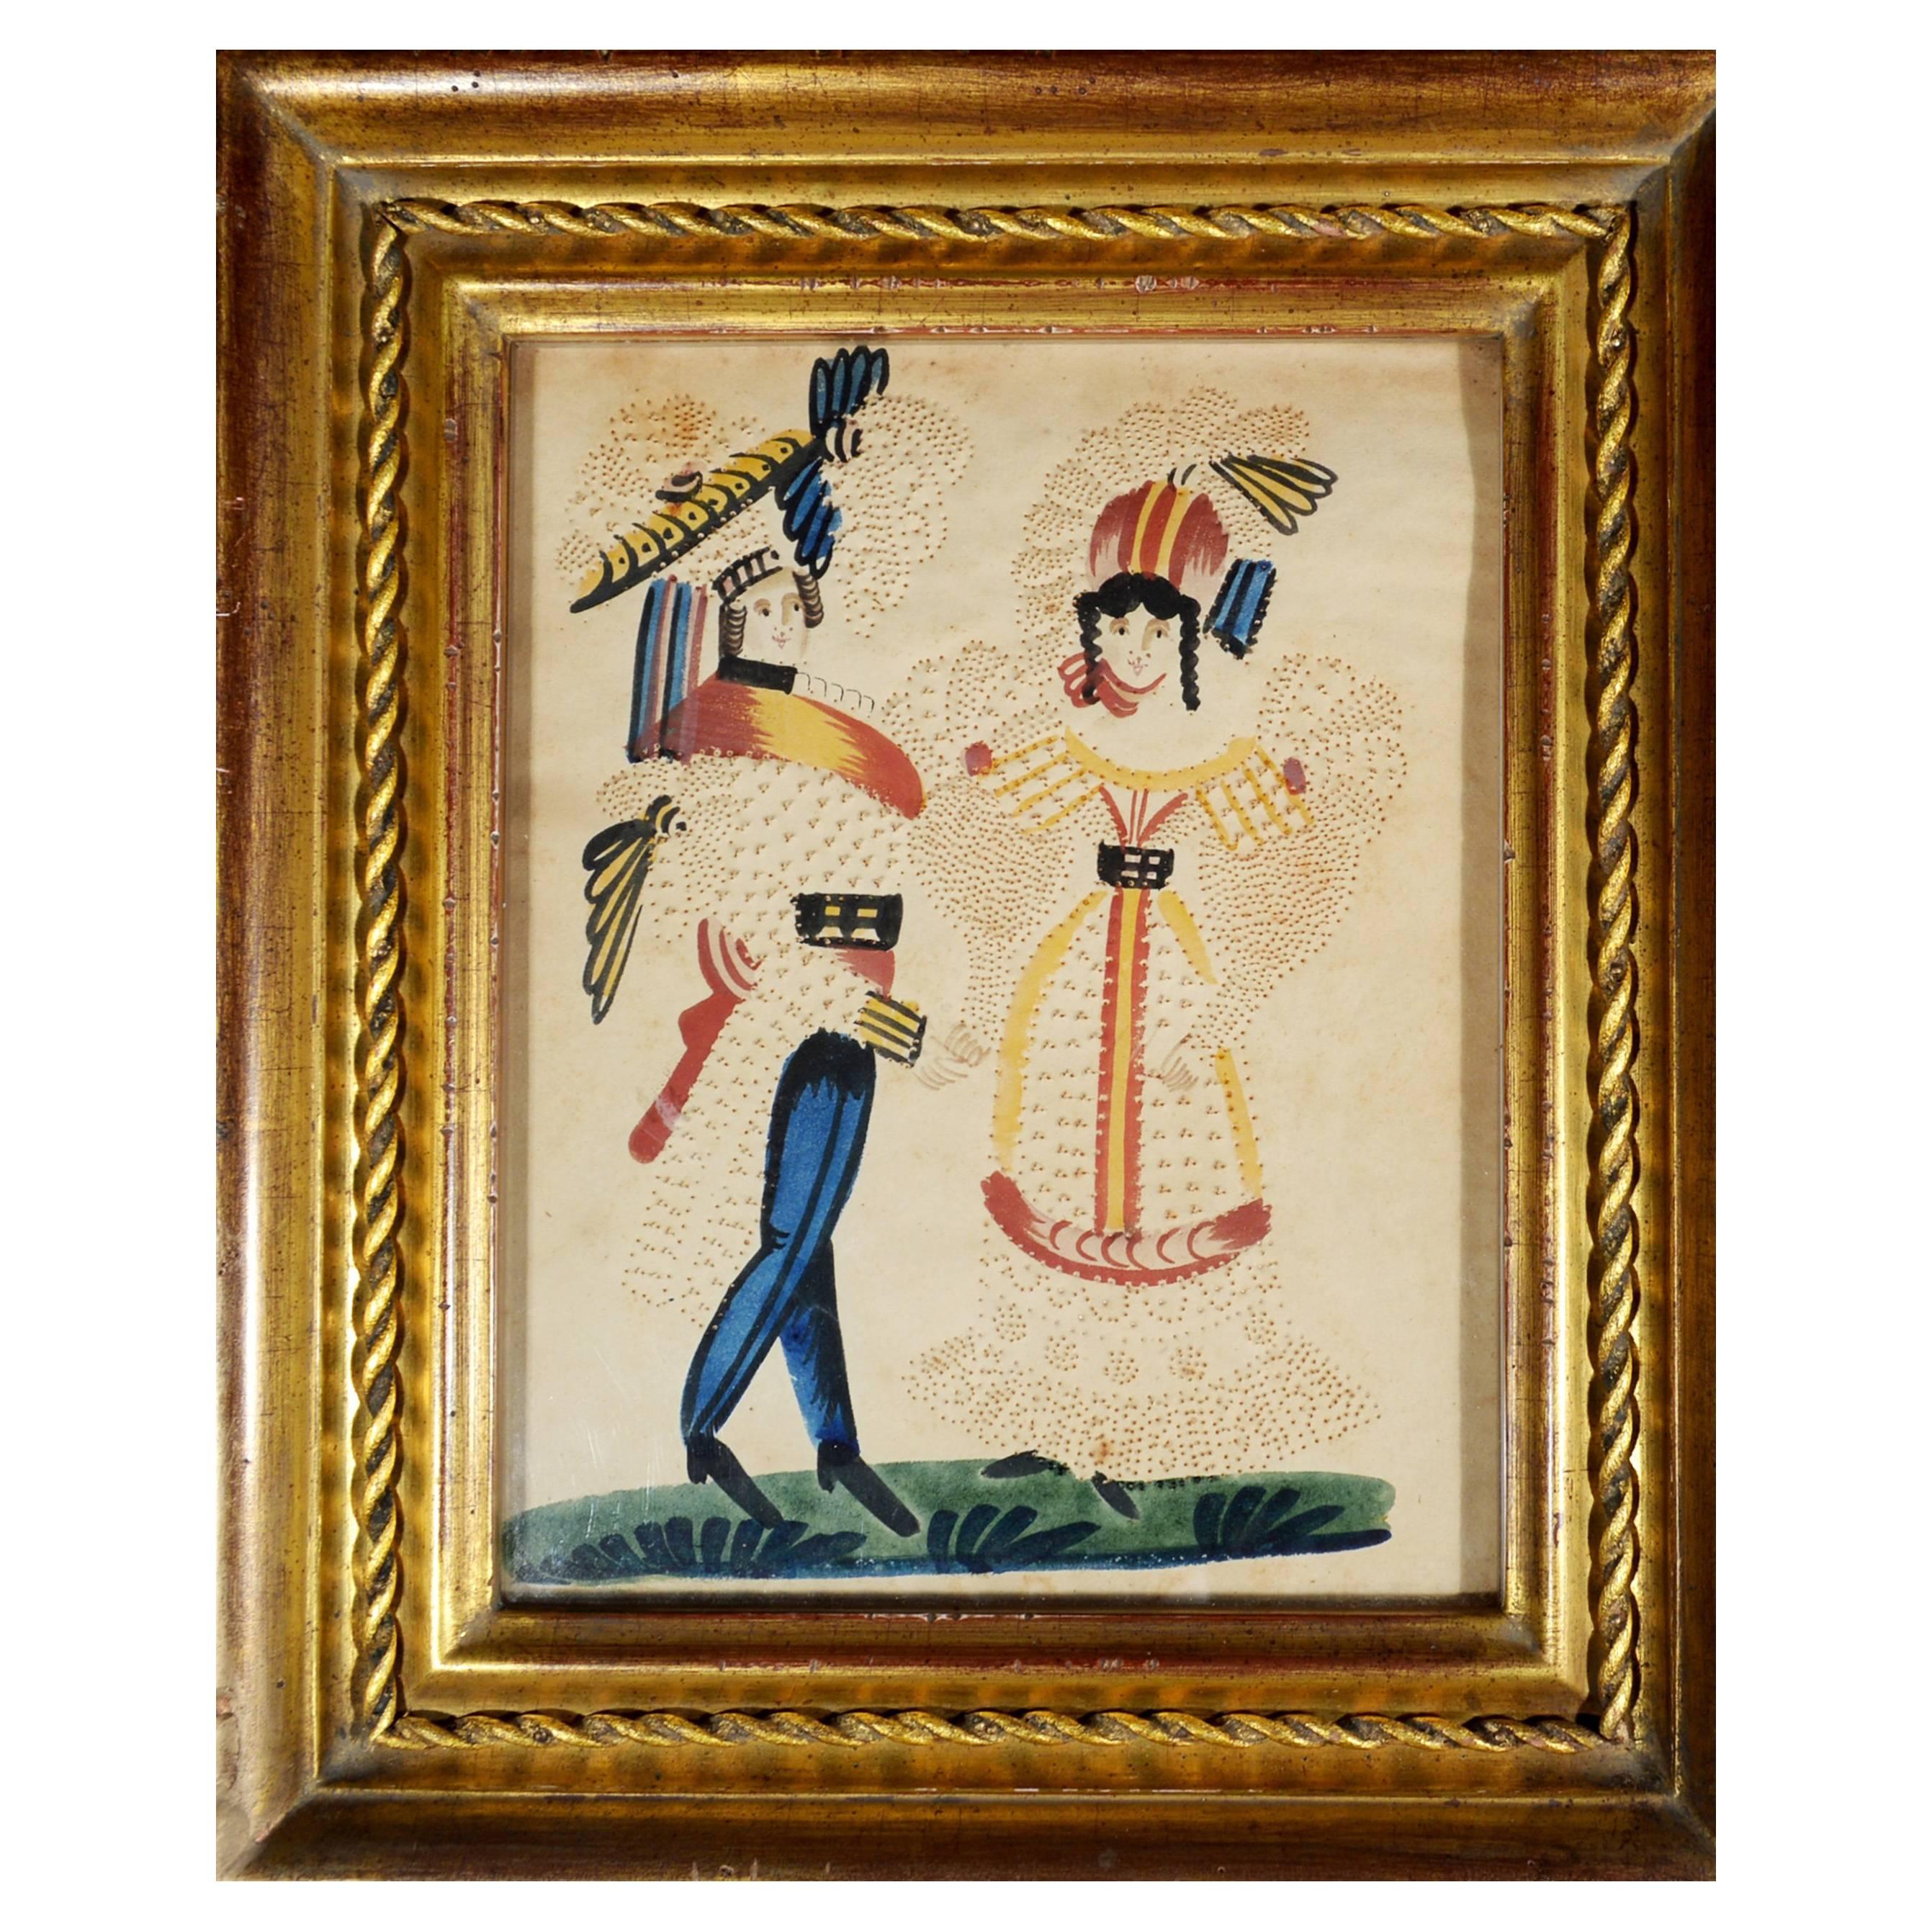 Charming American or Continental Pin-Prick Painting of a Happy Couple